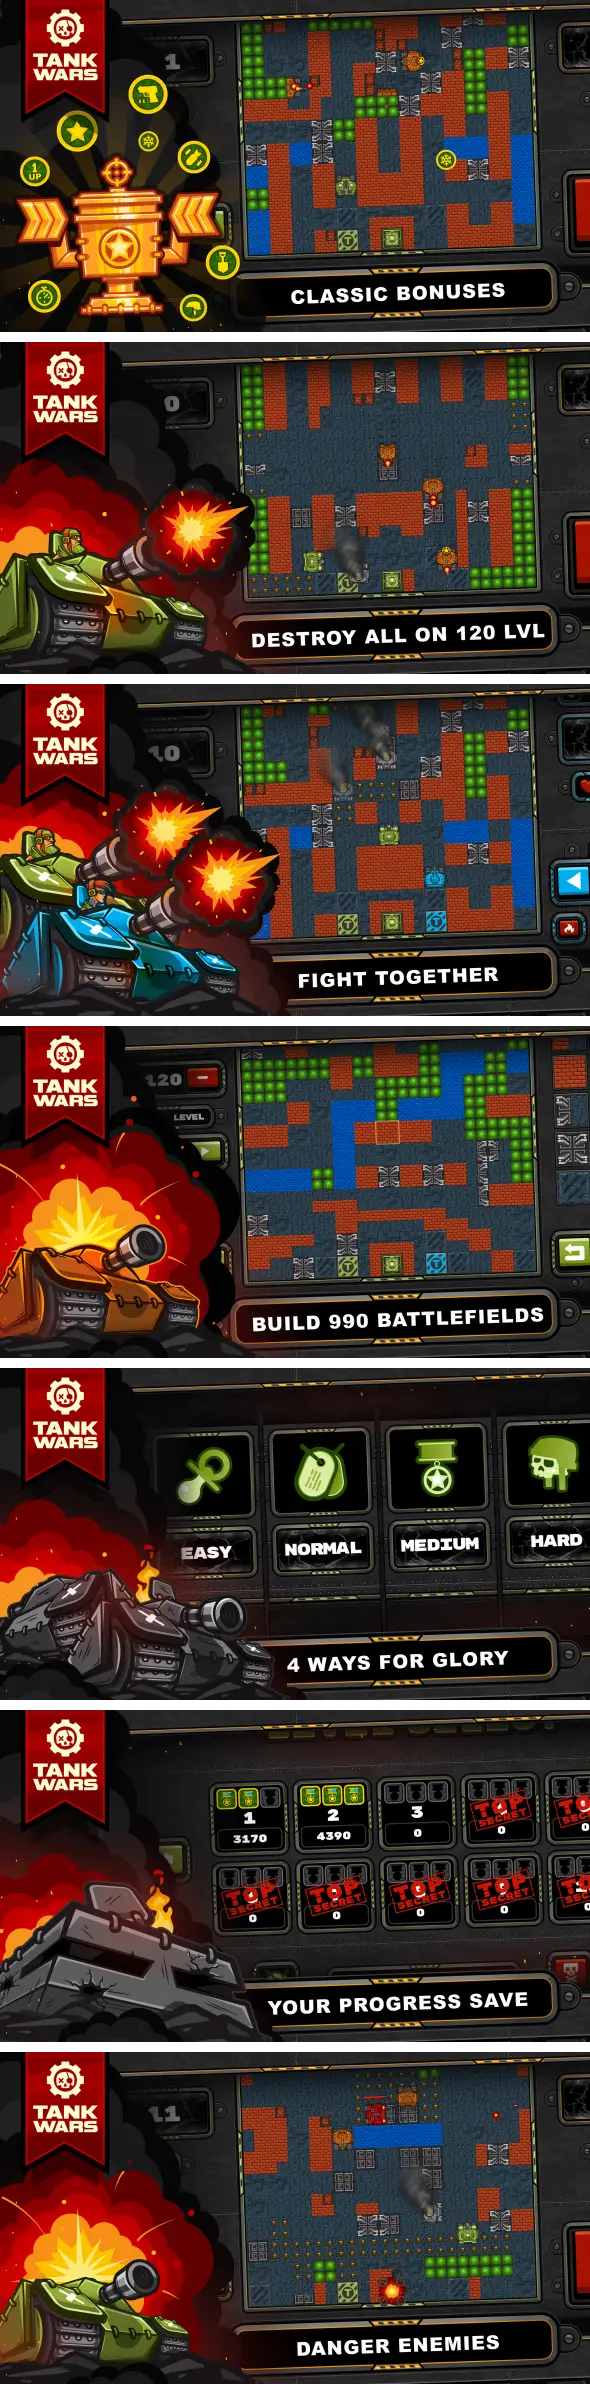 Tank Wars - HTML5 Game 120 Levels + Level Constructor + Mobile! (Construct 3 | Construct 2 | Capx) - 3